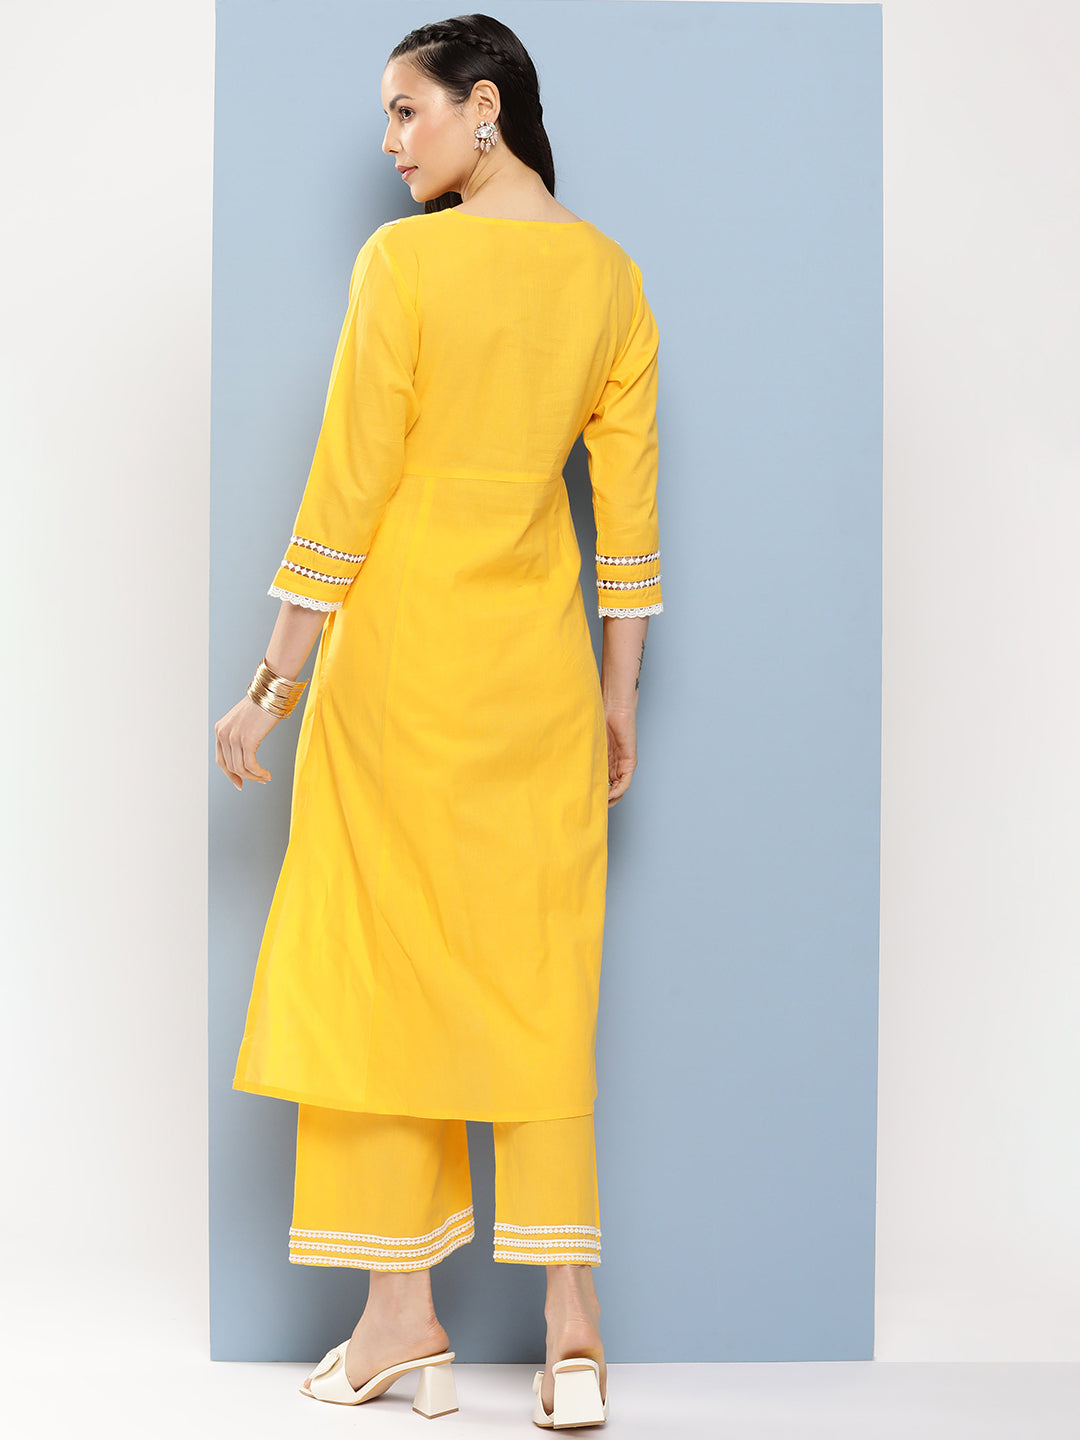 Women's Yellow Yoke Design Kurta With Lace Details & Yellow Solid Lace Details Palazzos - Bhama Couture